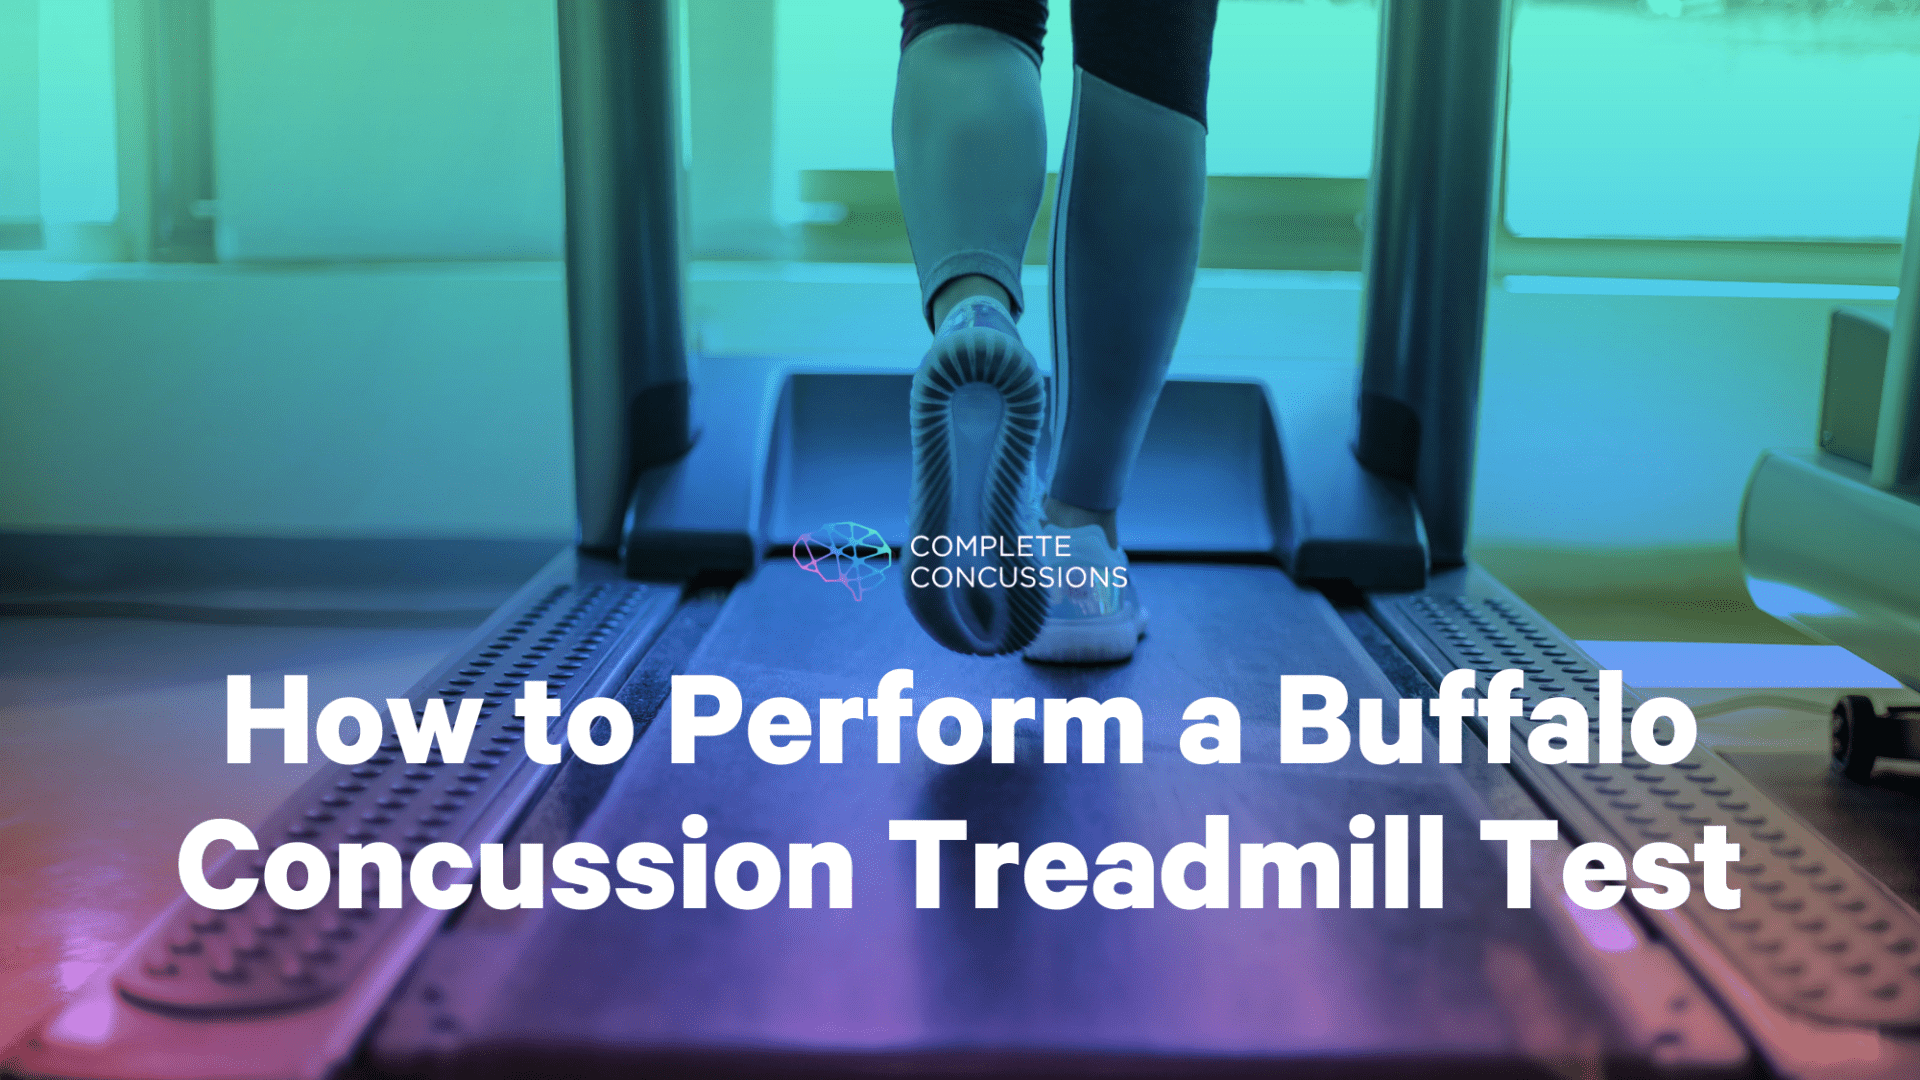 How to Perform a Buffalo Concussion Treadmill Test